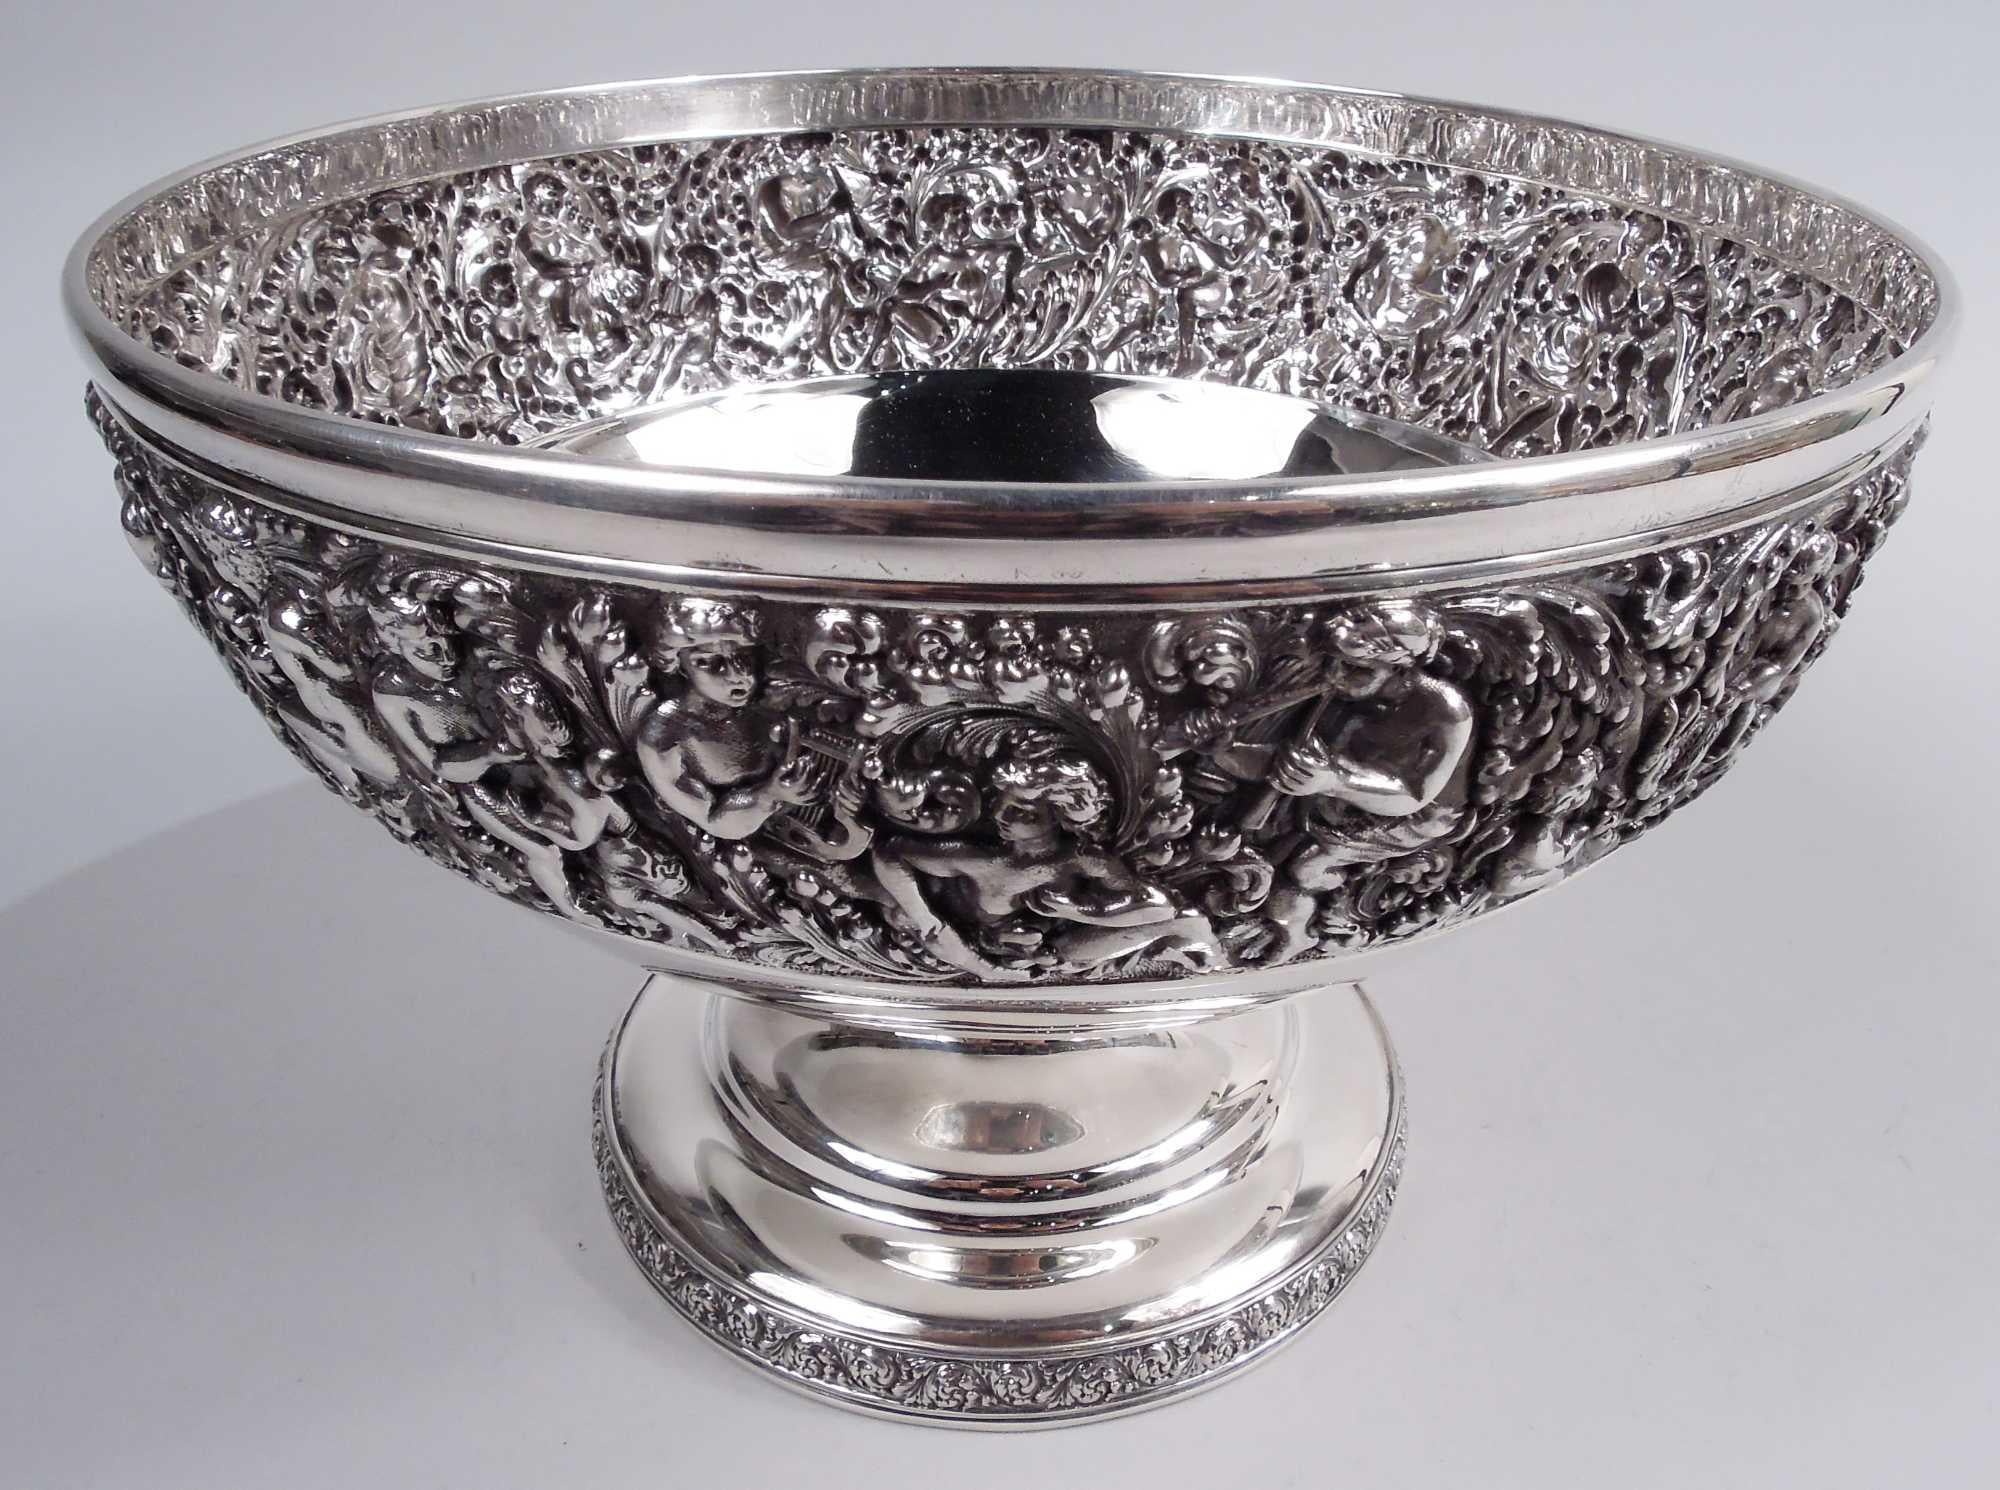 Olympian sterling silver centerpiece bowl. Made by Tiffany & Co. in New York. Curved and tapering bowl on domed foot. At top a dense repousse frieze of love-making, harp-stumming nymphs, gods, and cherubs. Foot rim has rinceaux border. A beautiful